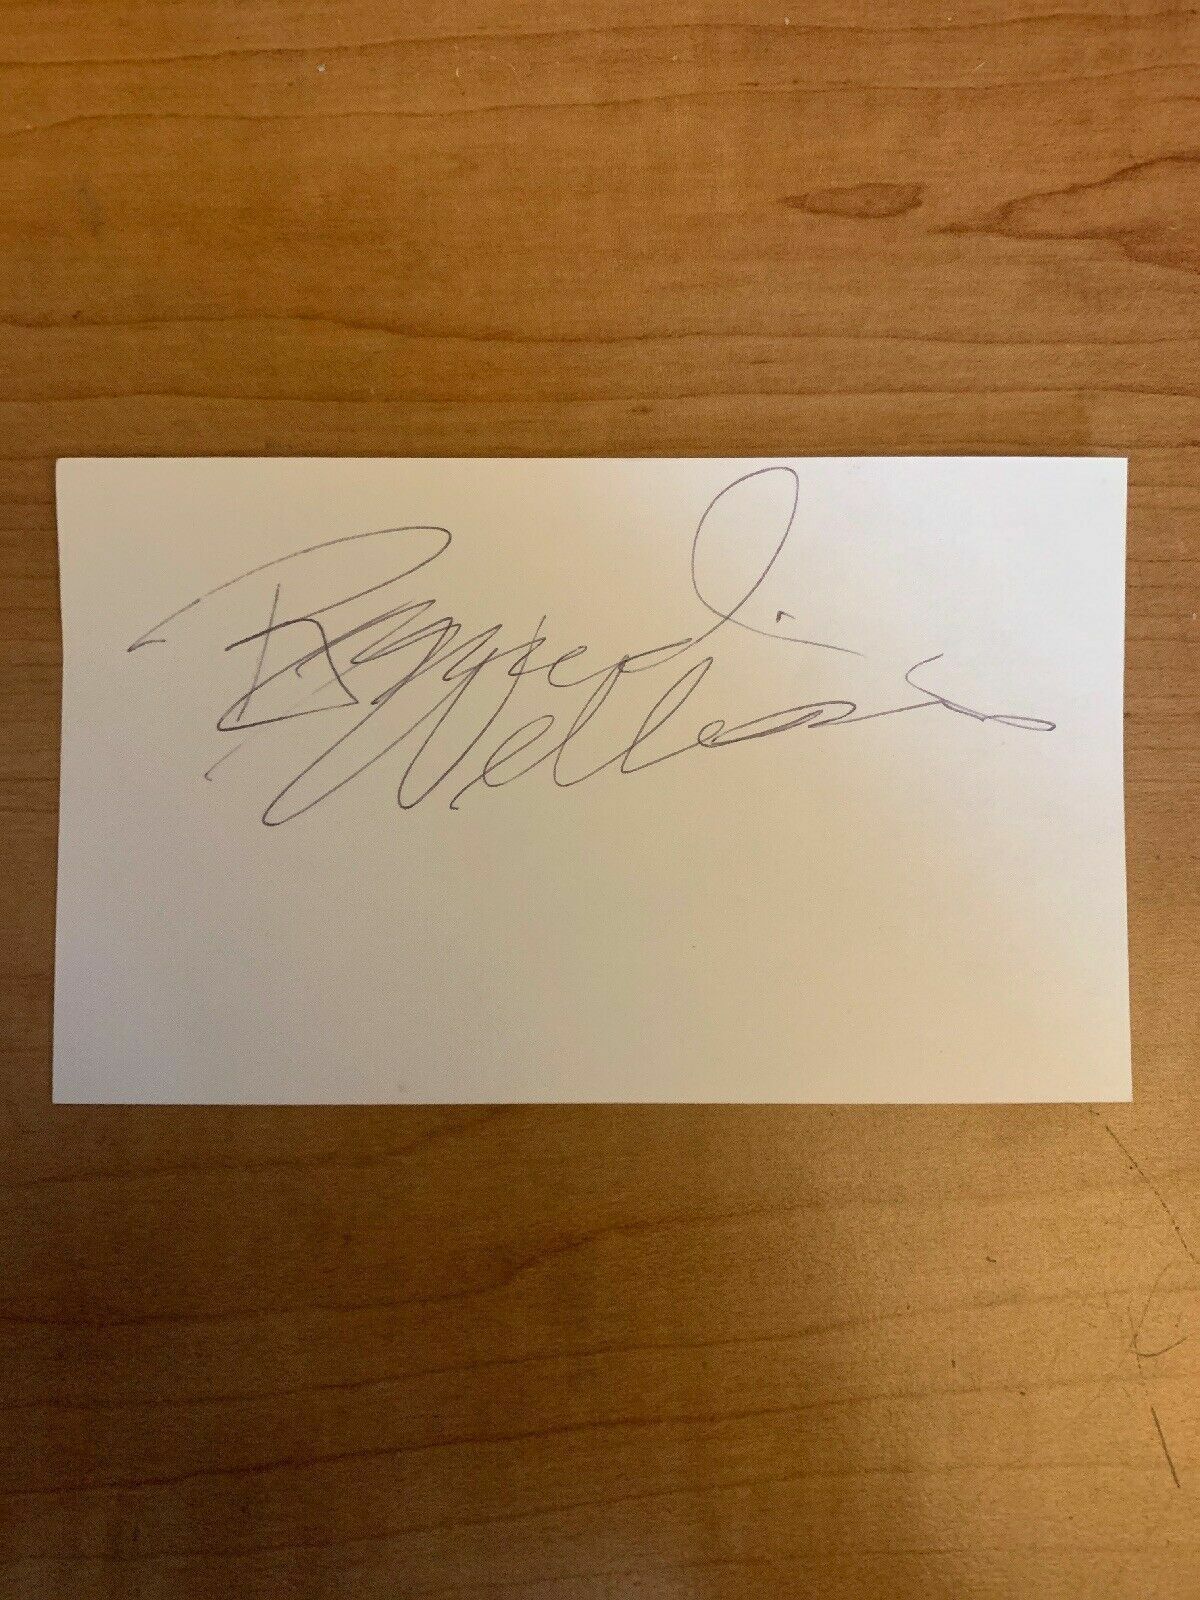 BERNIE WILLIAMS - LASALLE BASKETBALL - AUTHENTIC AUTOGRAPH SIGNED- B3760